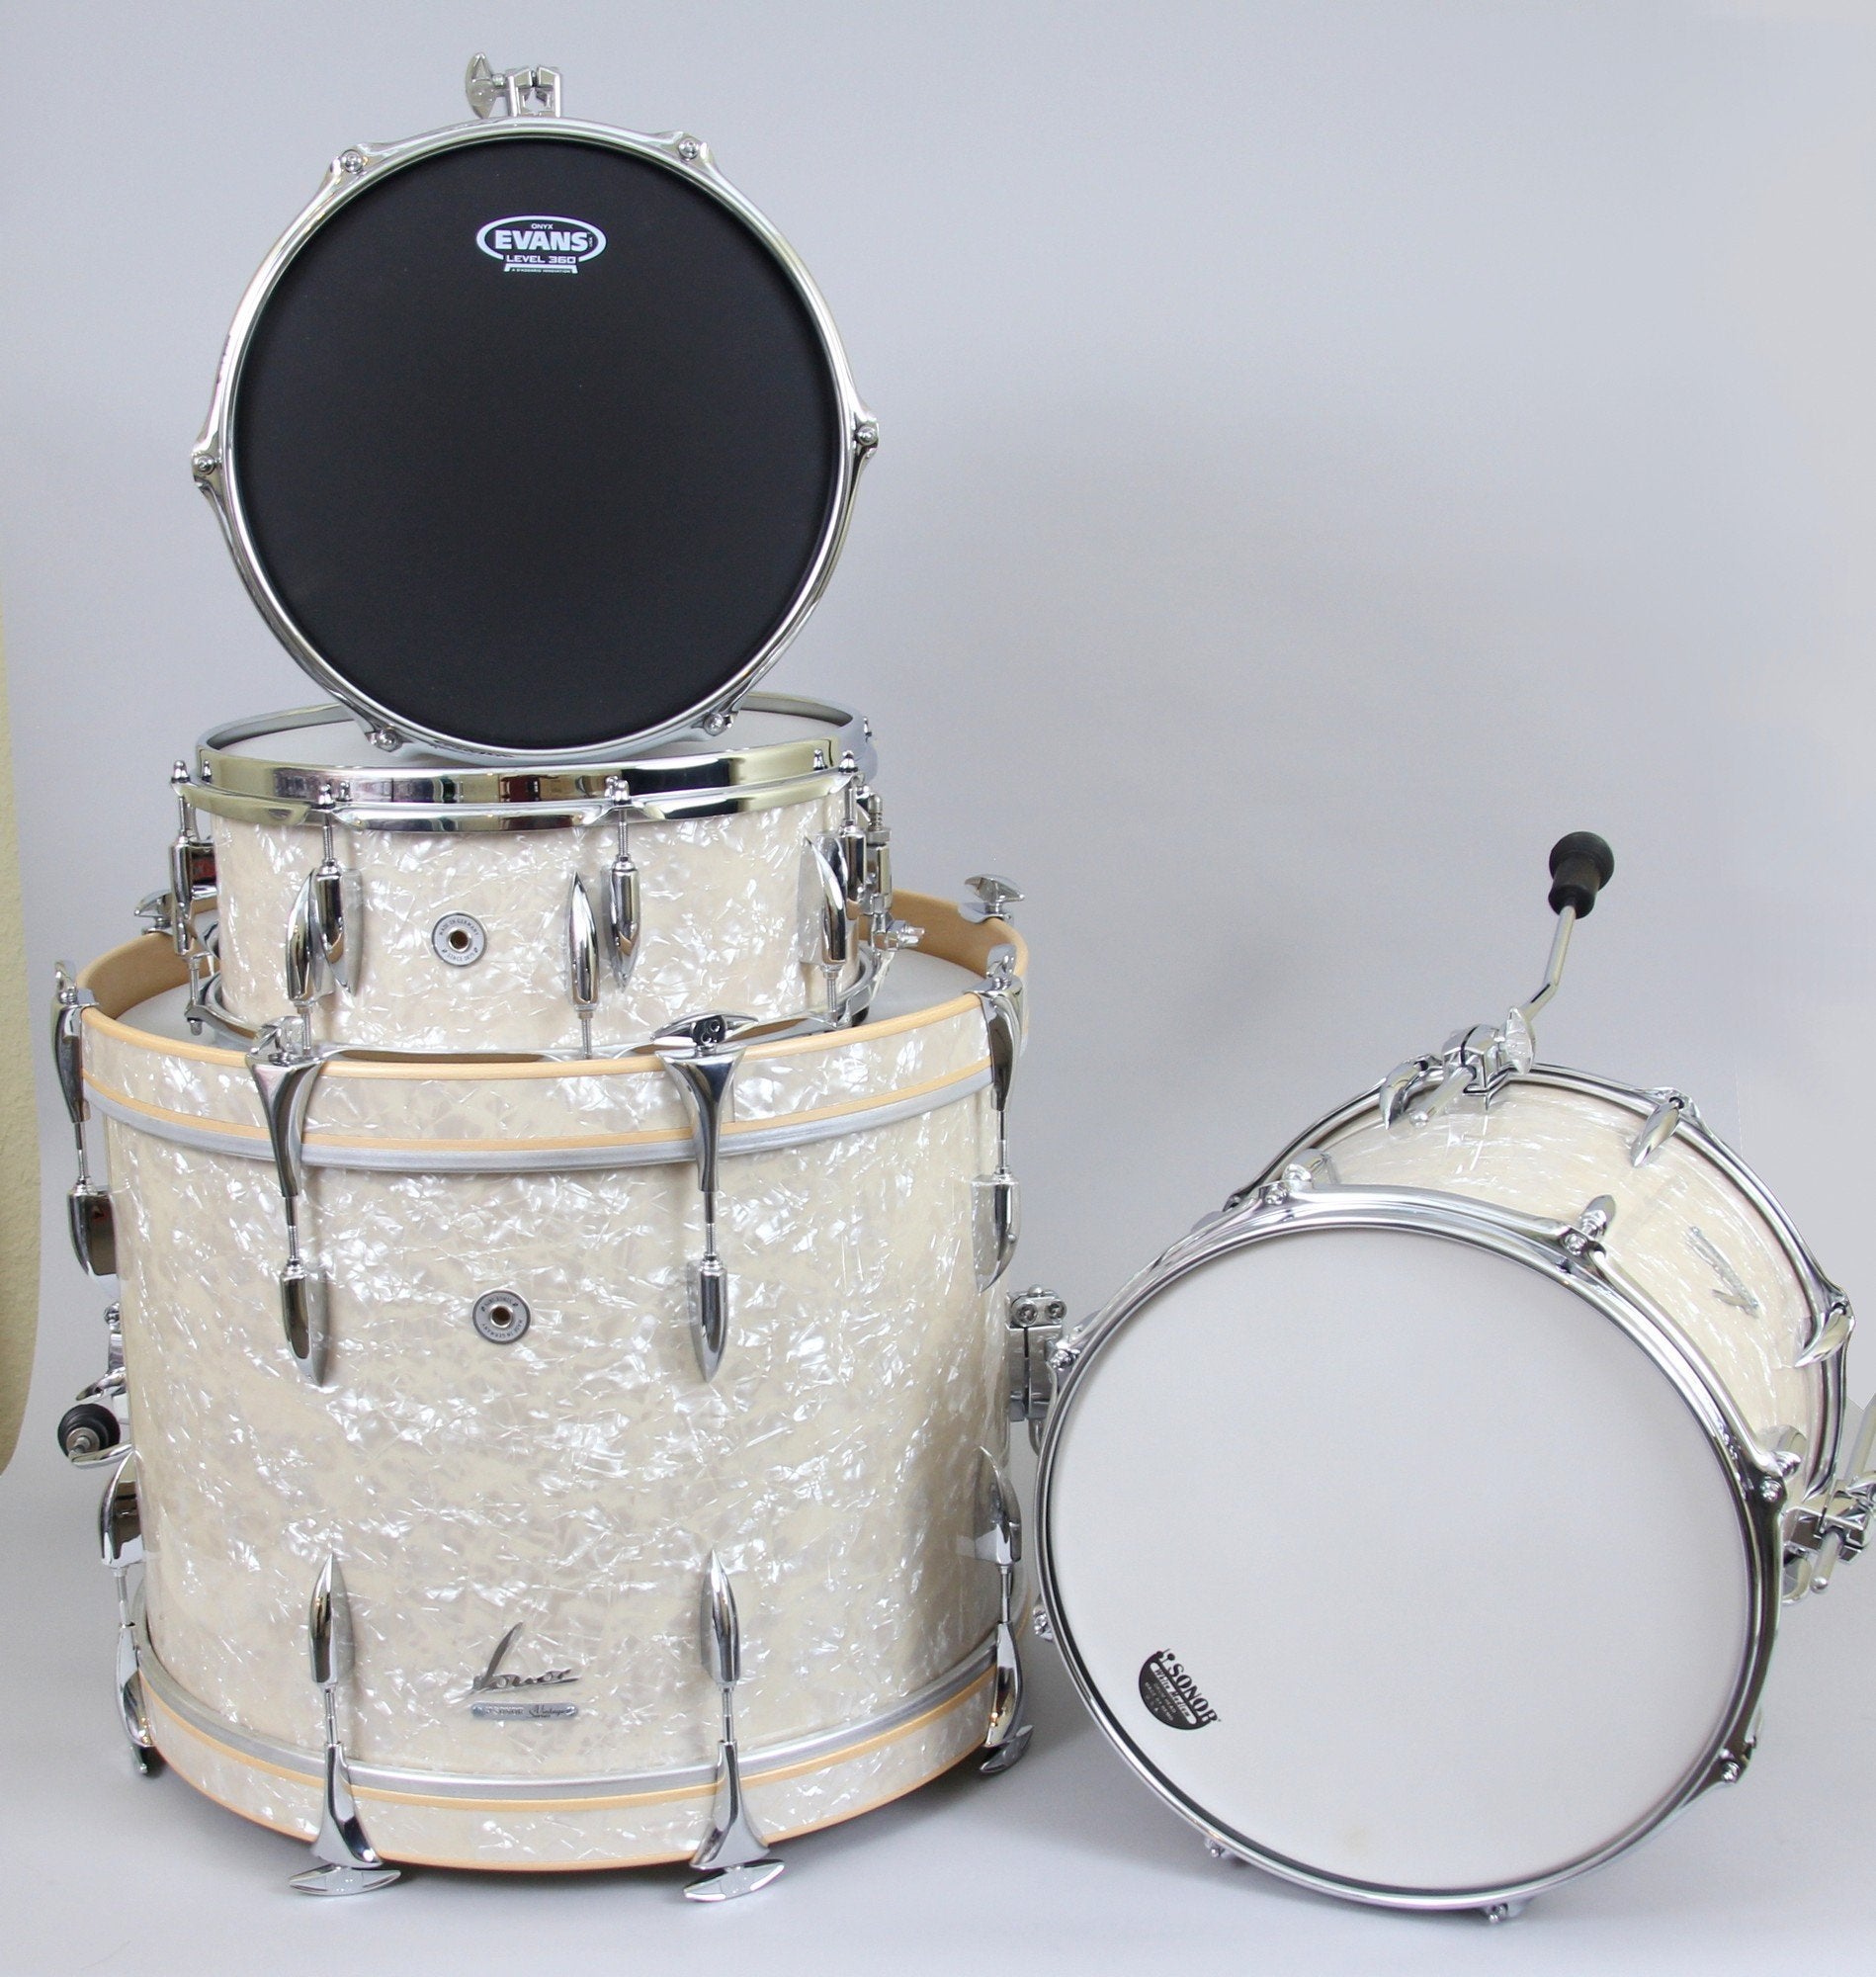 Sonor Vintage 20" 3 Piece Shell Pack